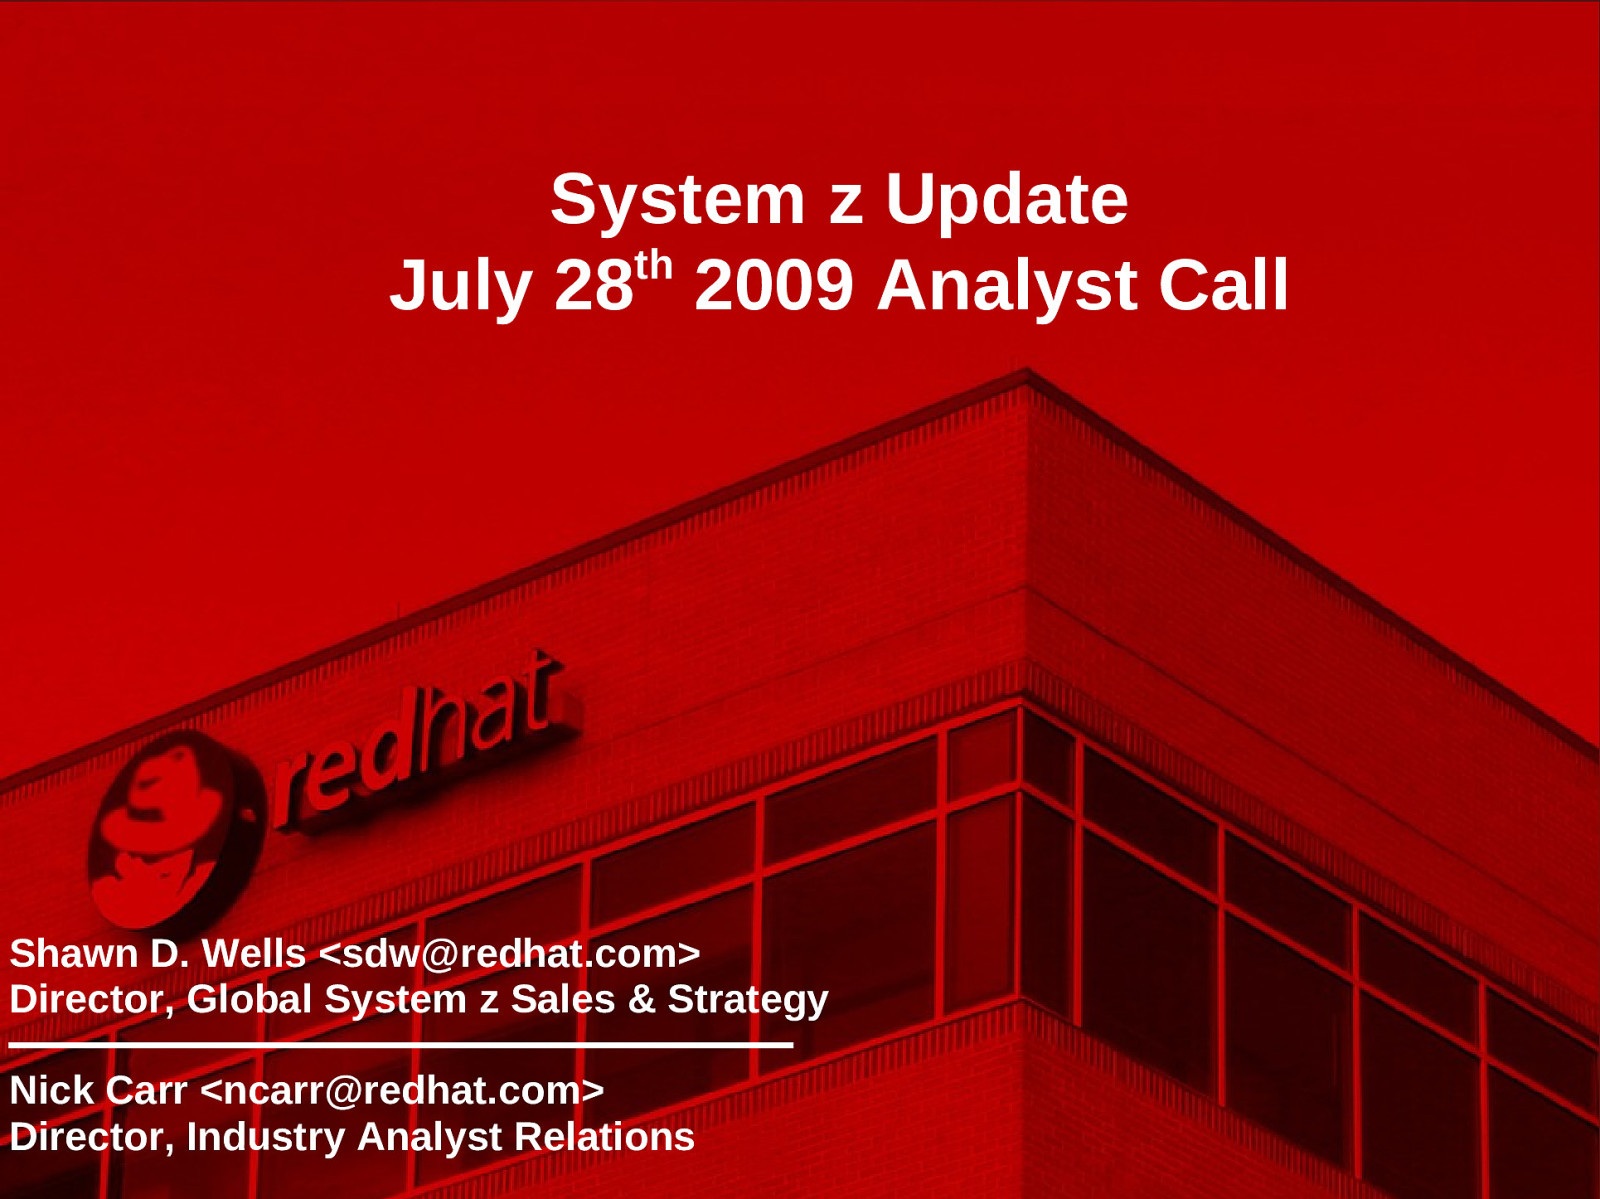 System z Update - Analyst Call